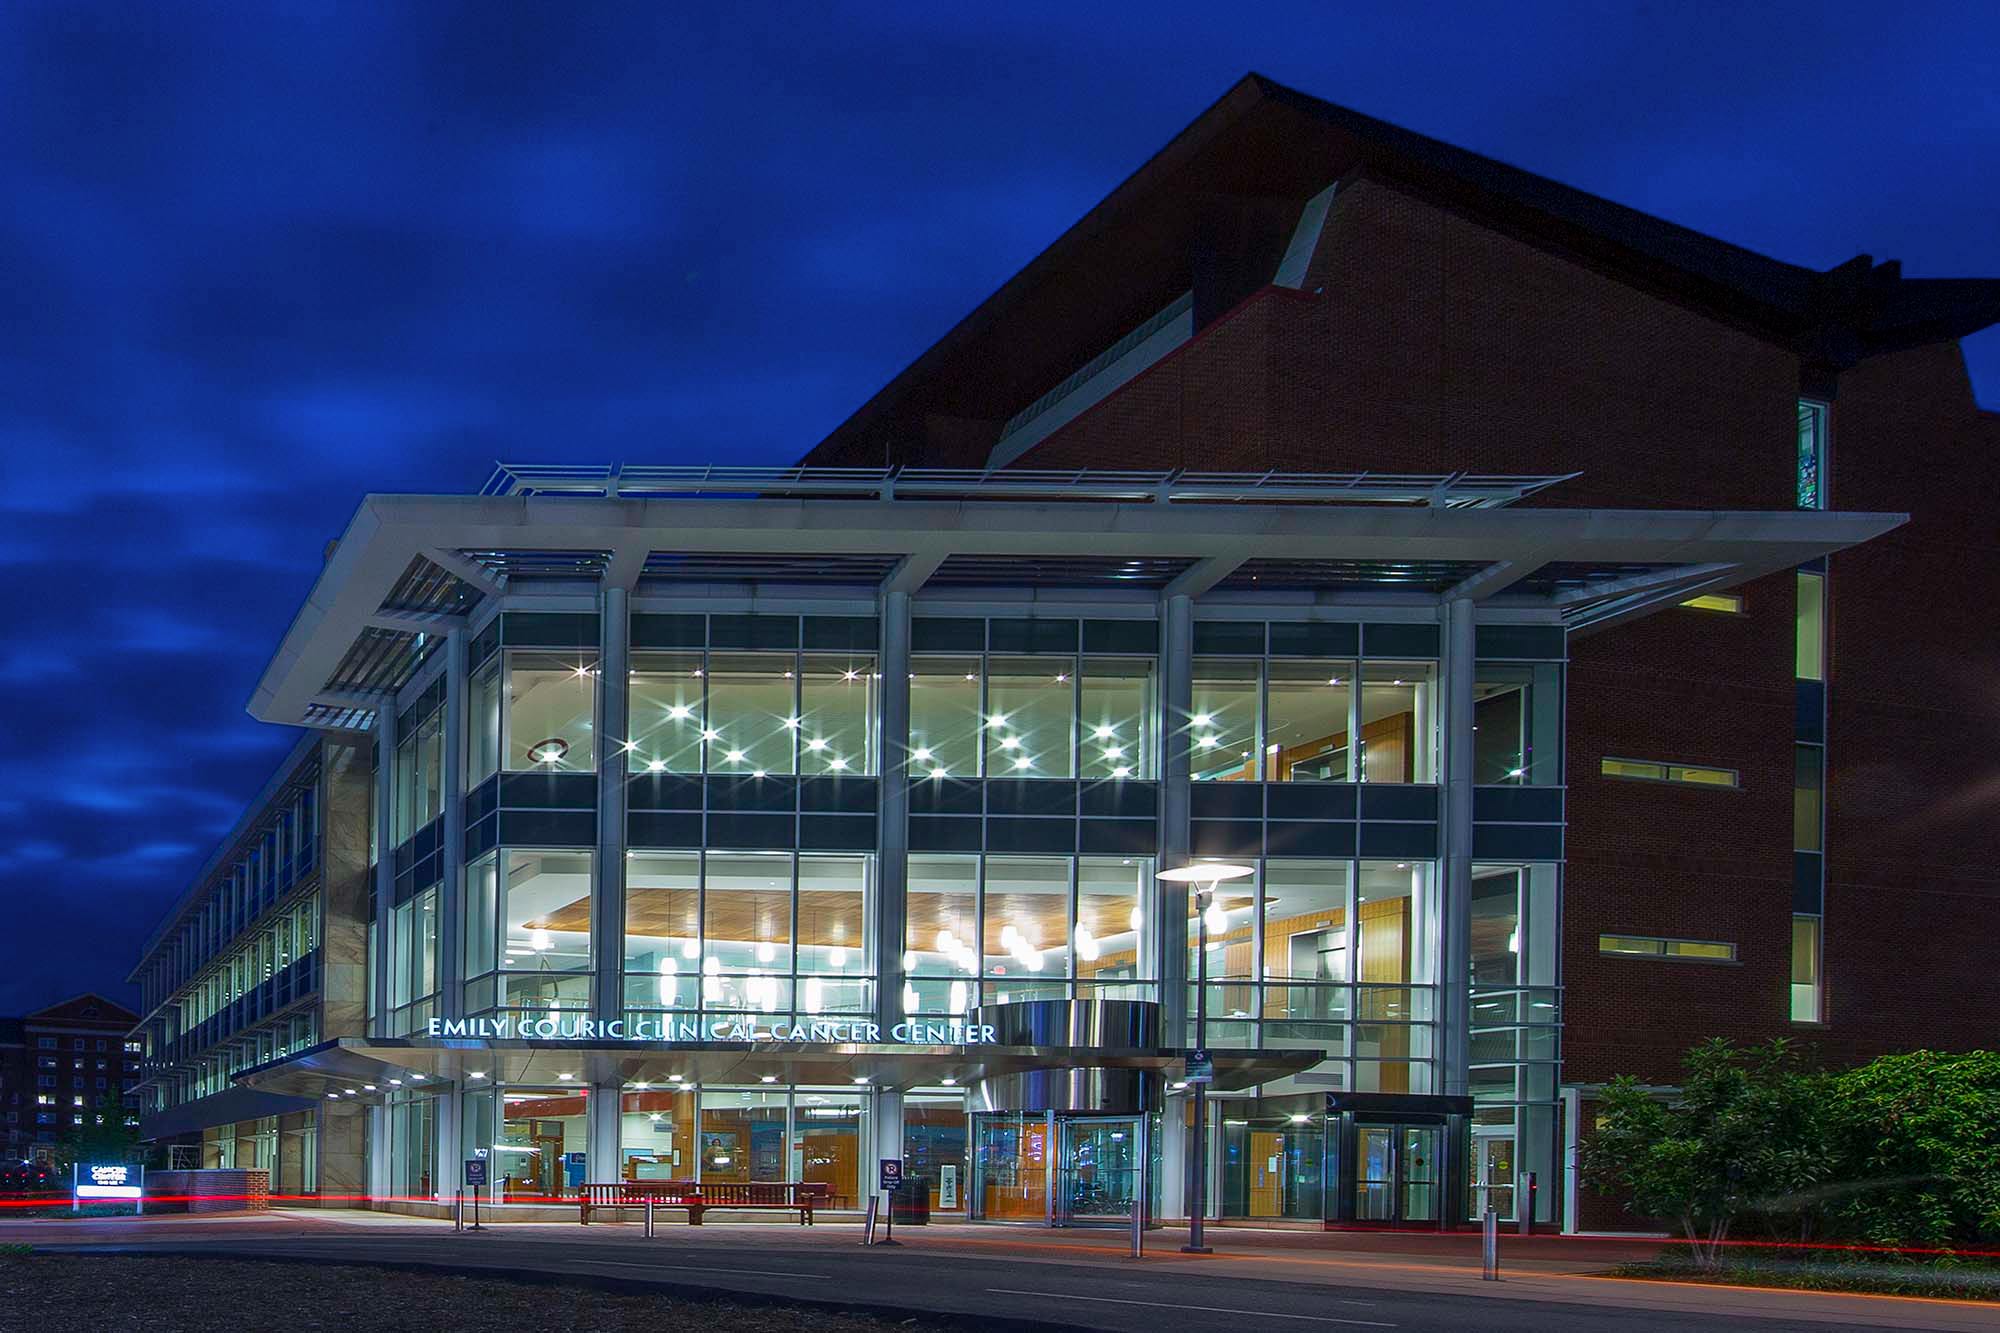 Exterior of the UVA Cancer Center building at night